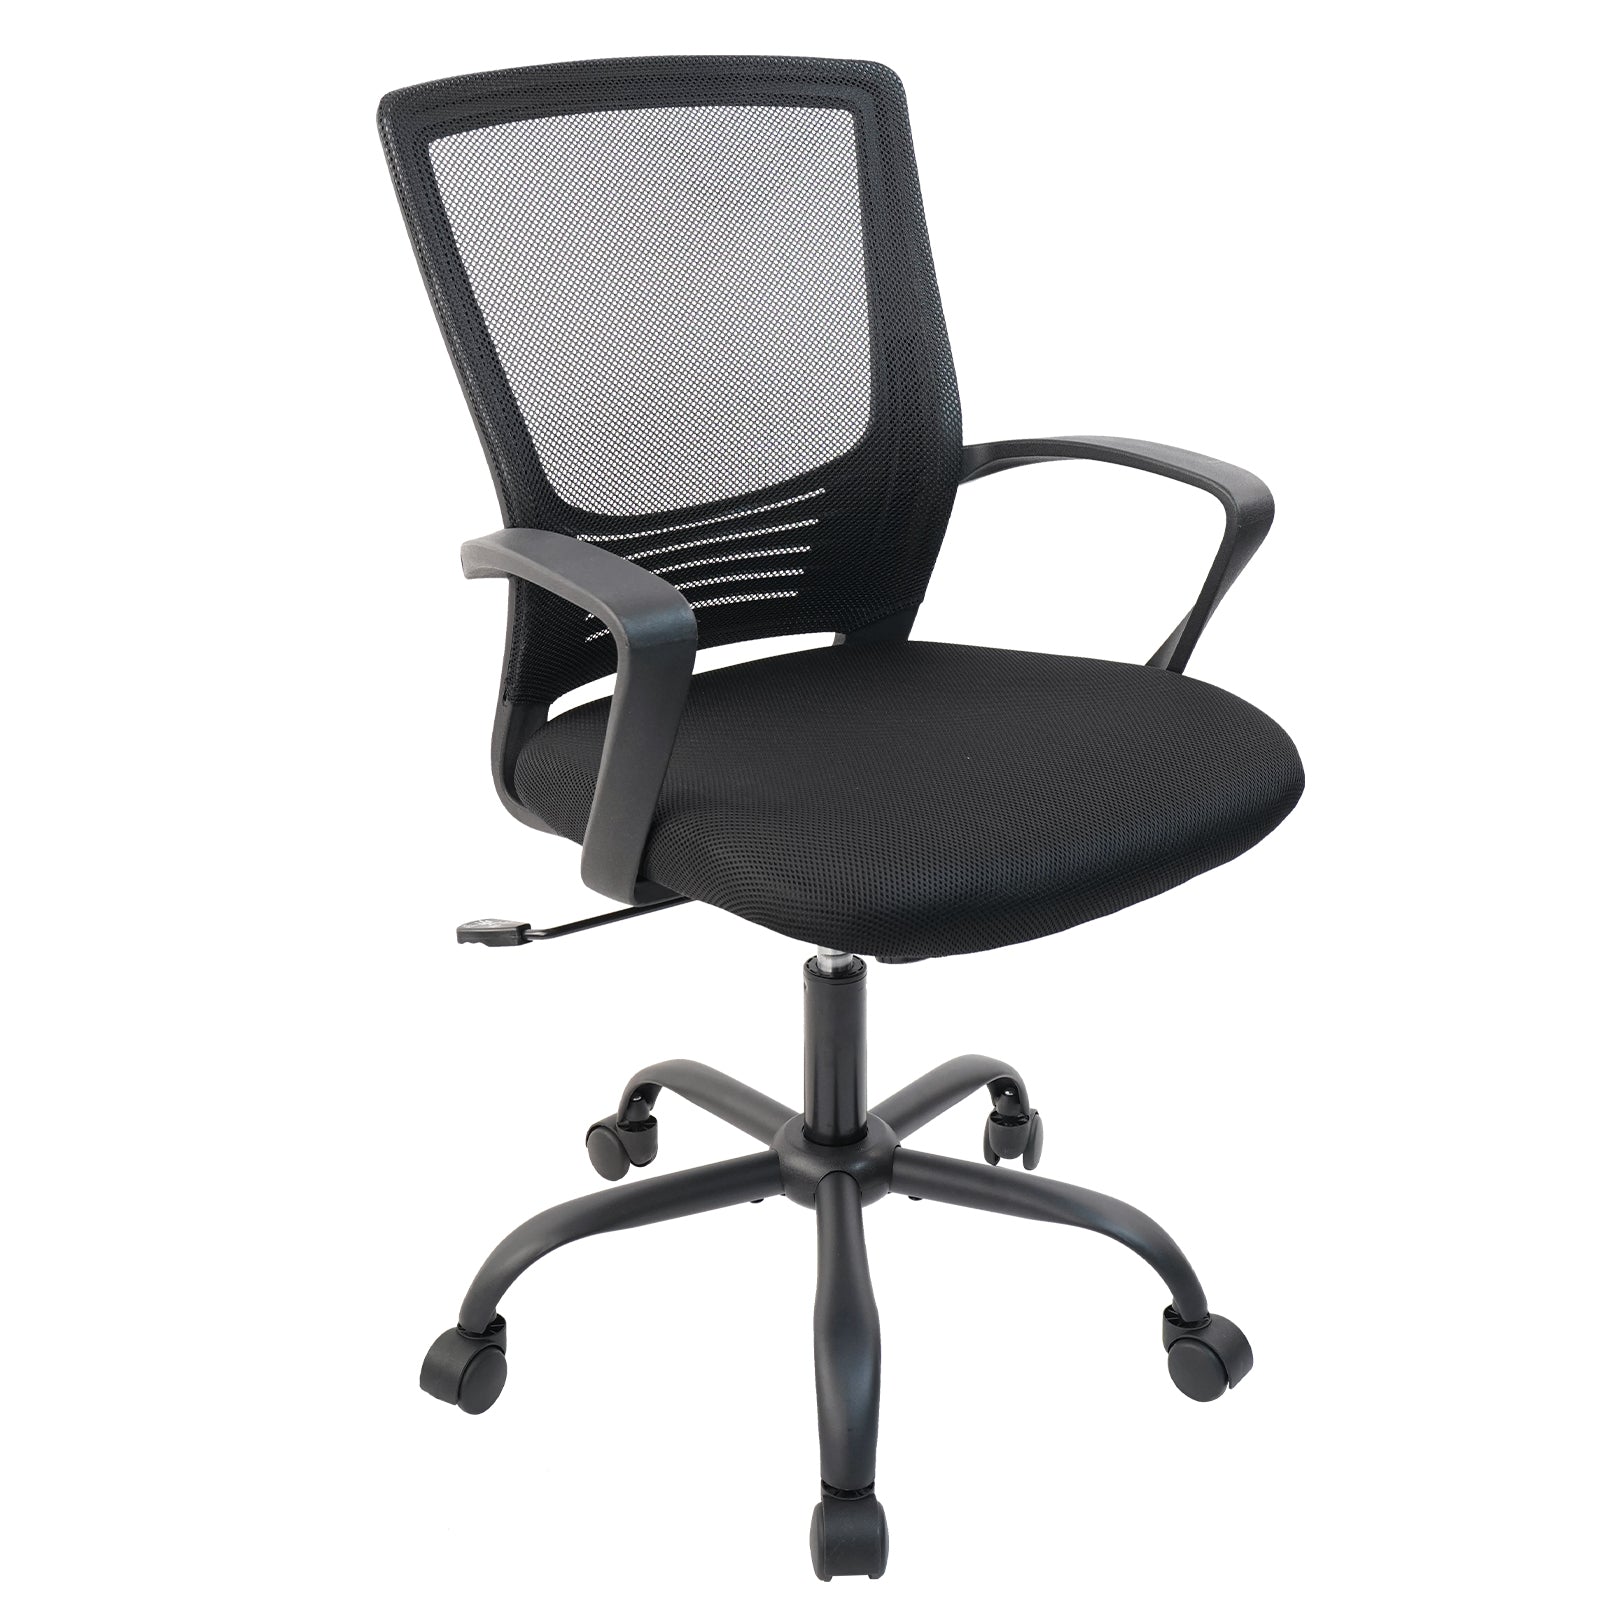 Office Chair, Desk Chair, Ergonomic Home Office Desk Chairs, Computer Chair  with Comfortable Armrests, Mesh Desk Chairs with Wheels, Office Desk Chair,  Mid-Back Task Chair with Lumbar Support 